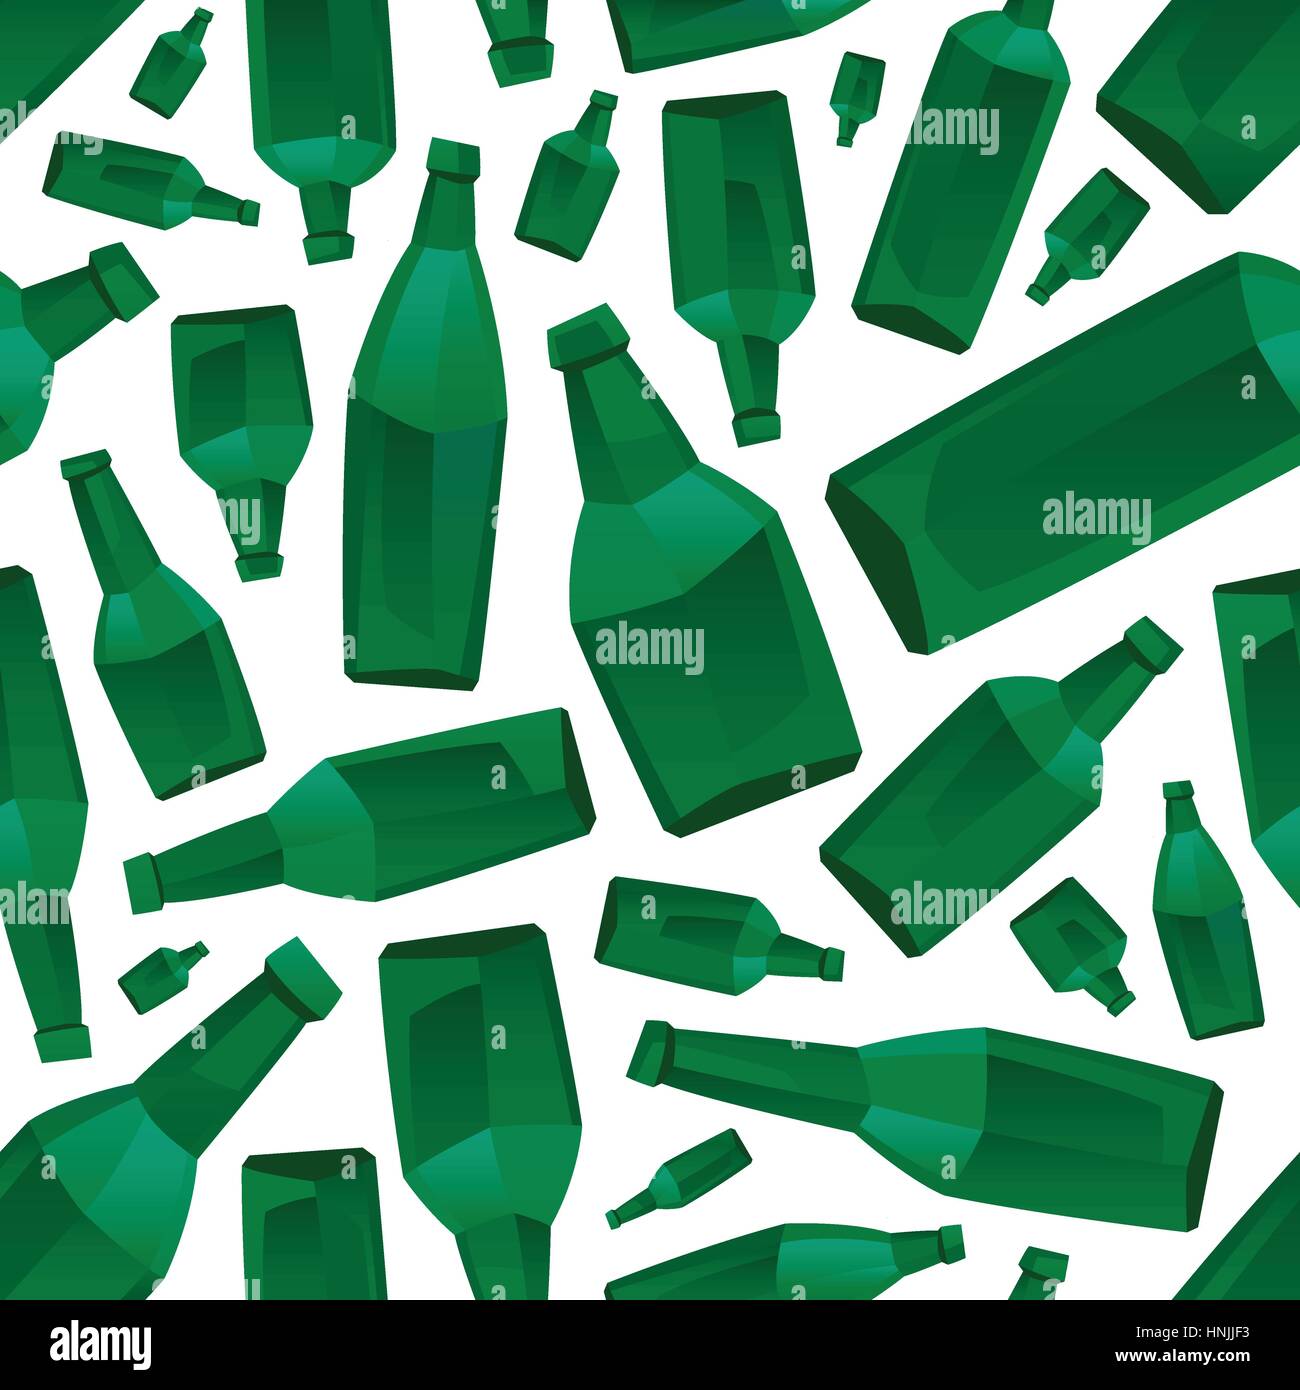 Seamless pattern with green glass bottles. Creative background with beer bottles for bar, pub, menu or restaraunt. Vector illustration image. Stock Vector